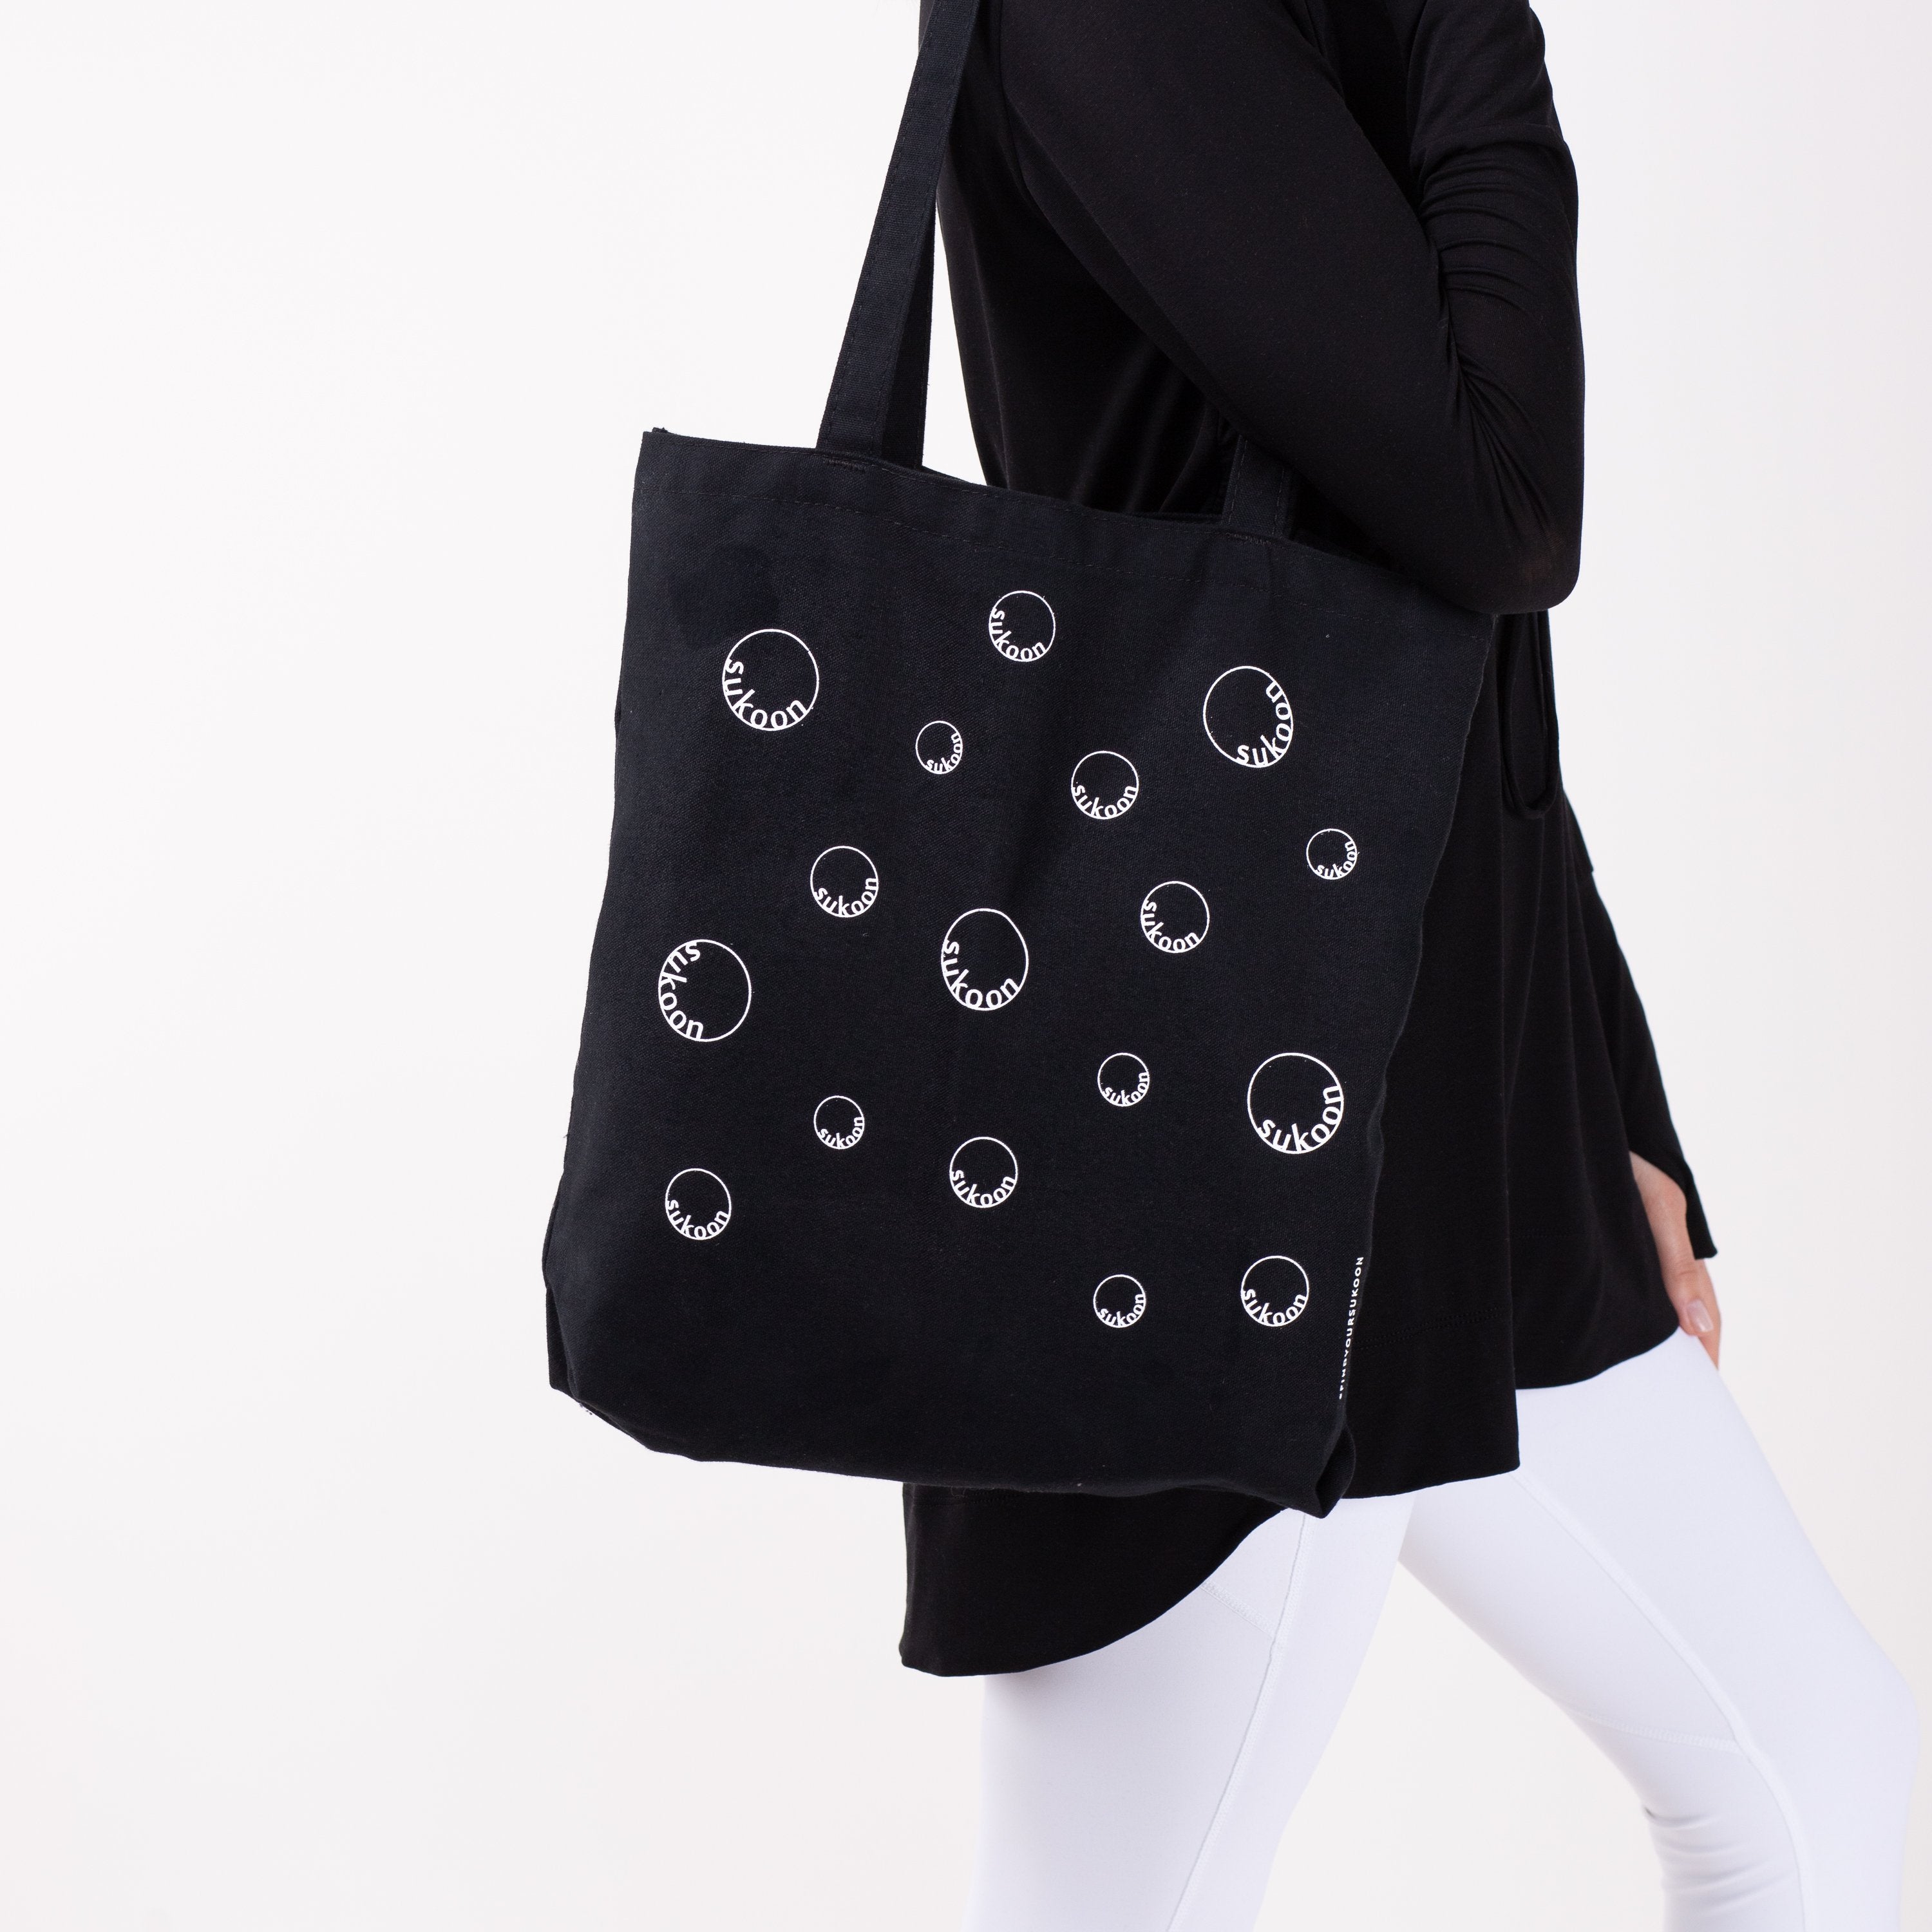 Black tote bag with all-over moon print on woman's arm.